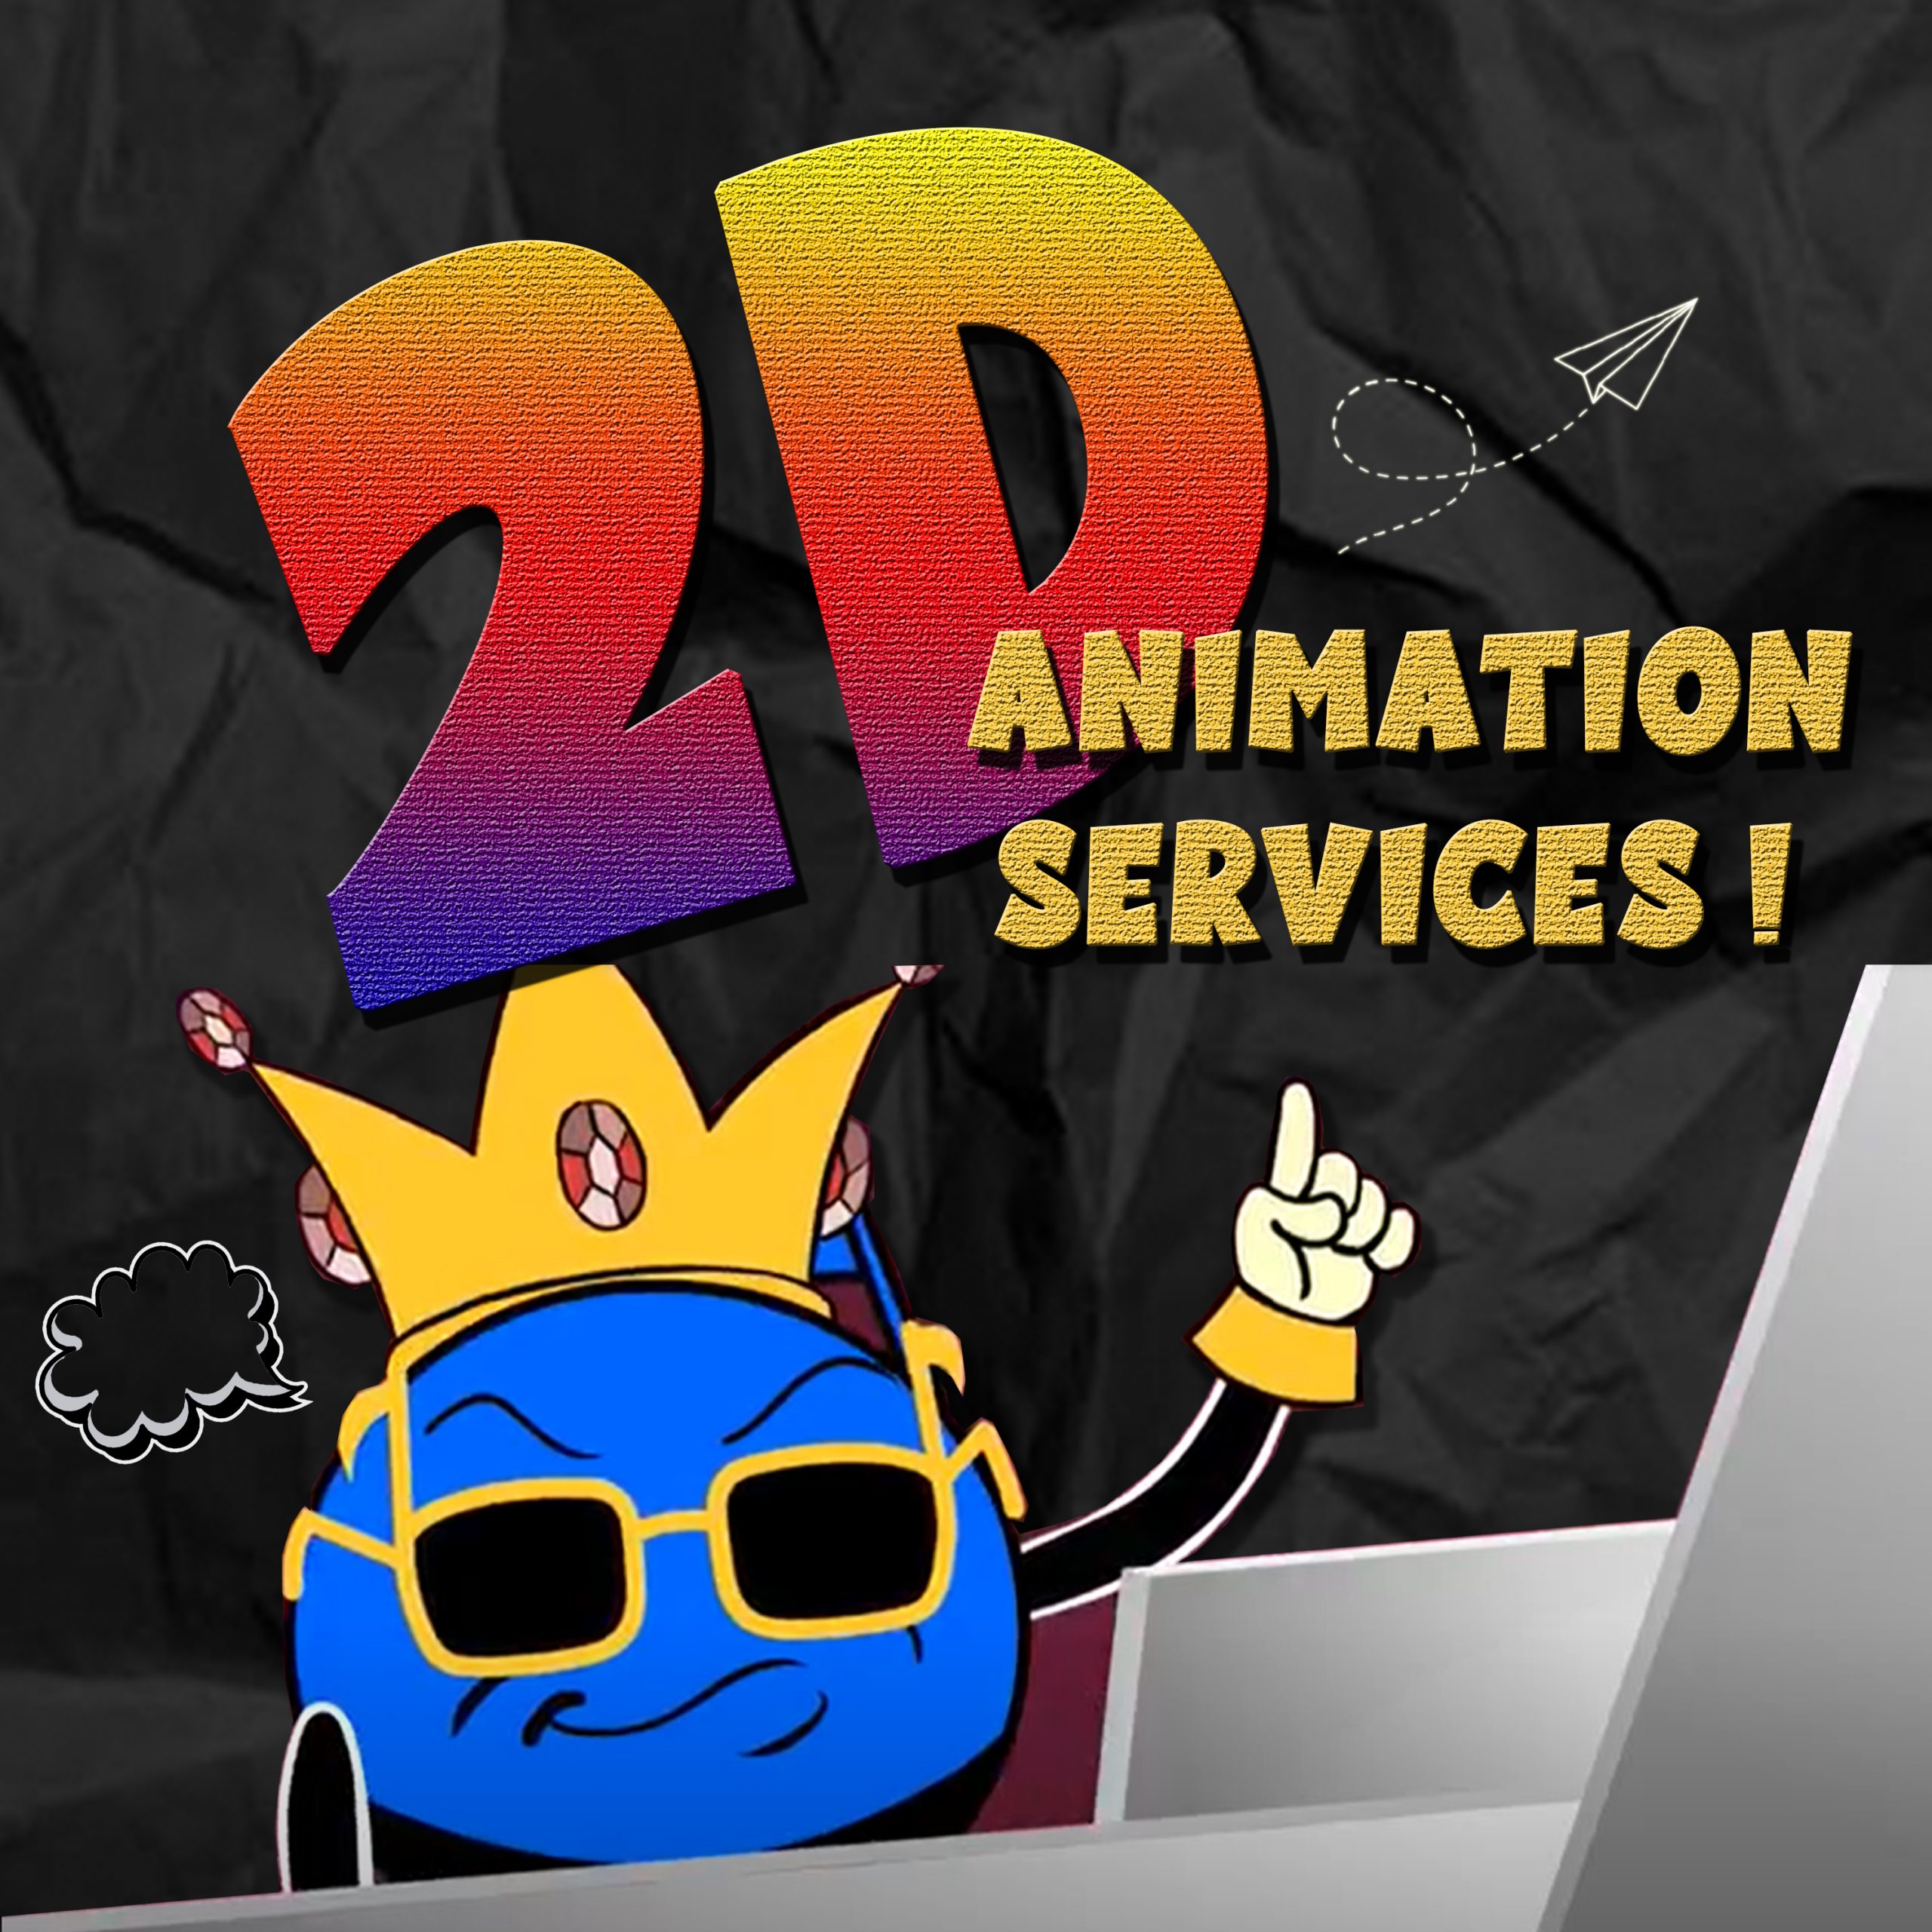 Animation Services | 2d animation studios | animation company in India